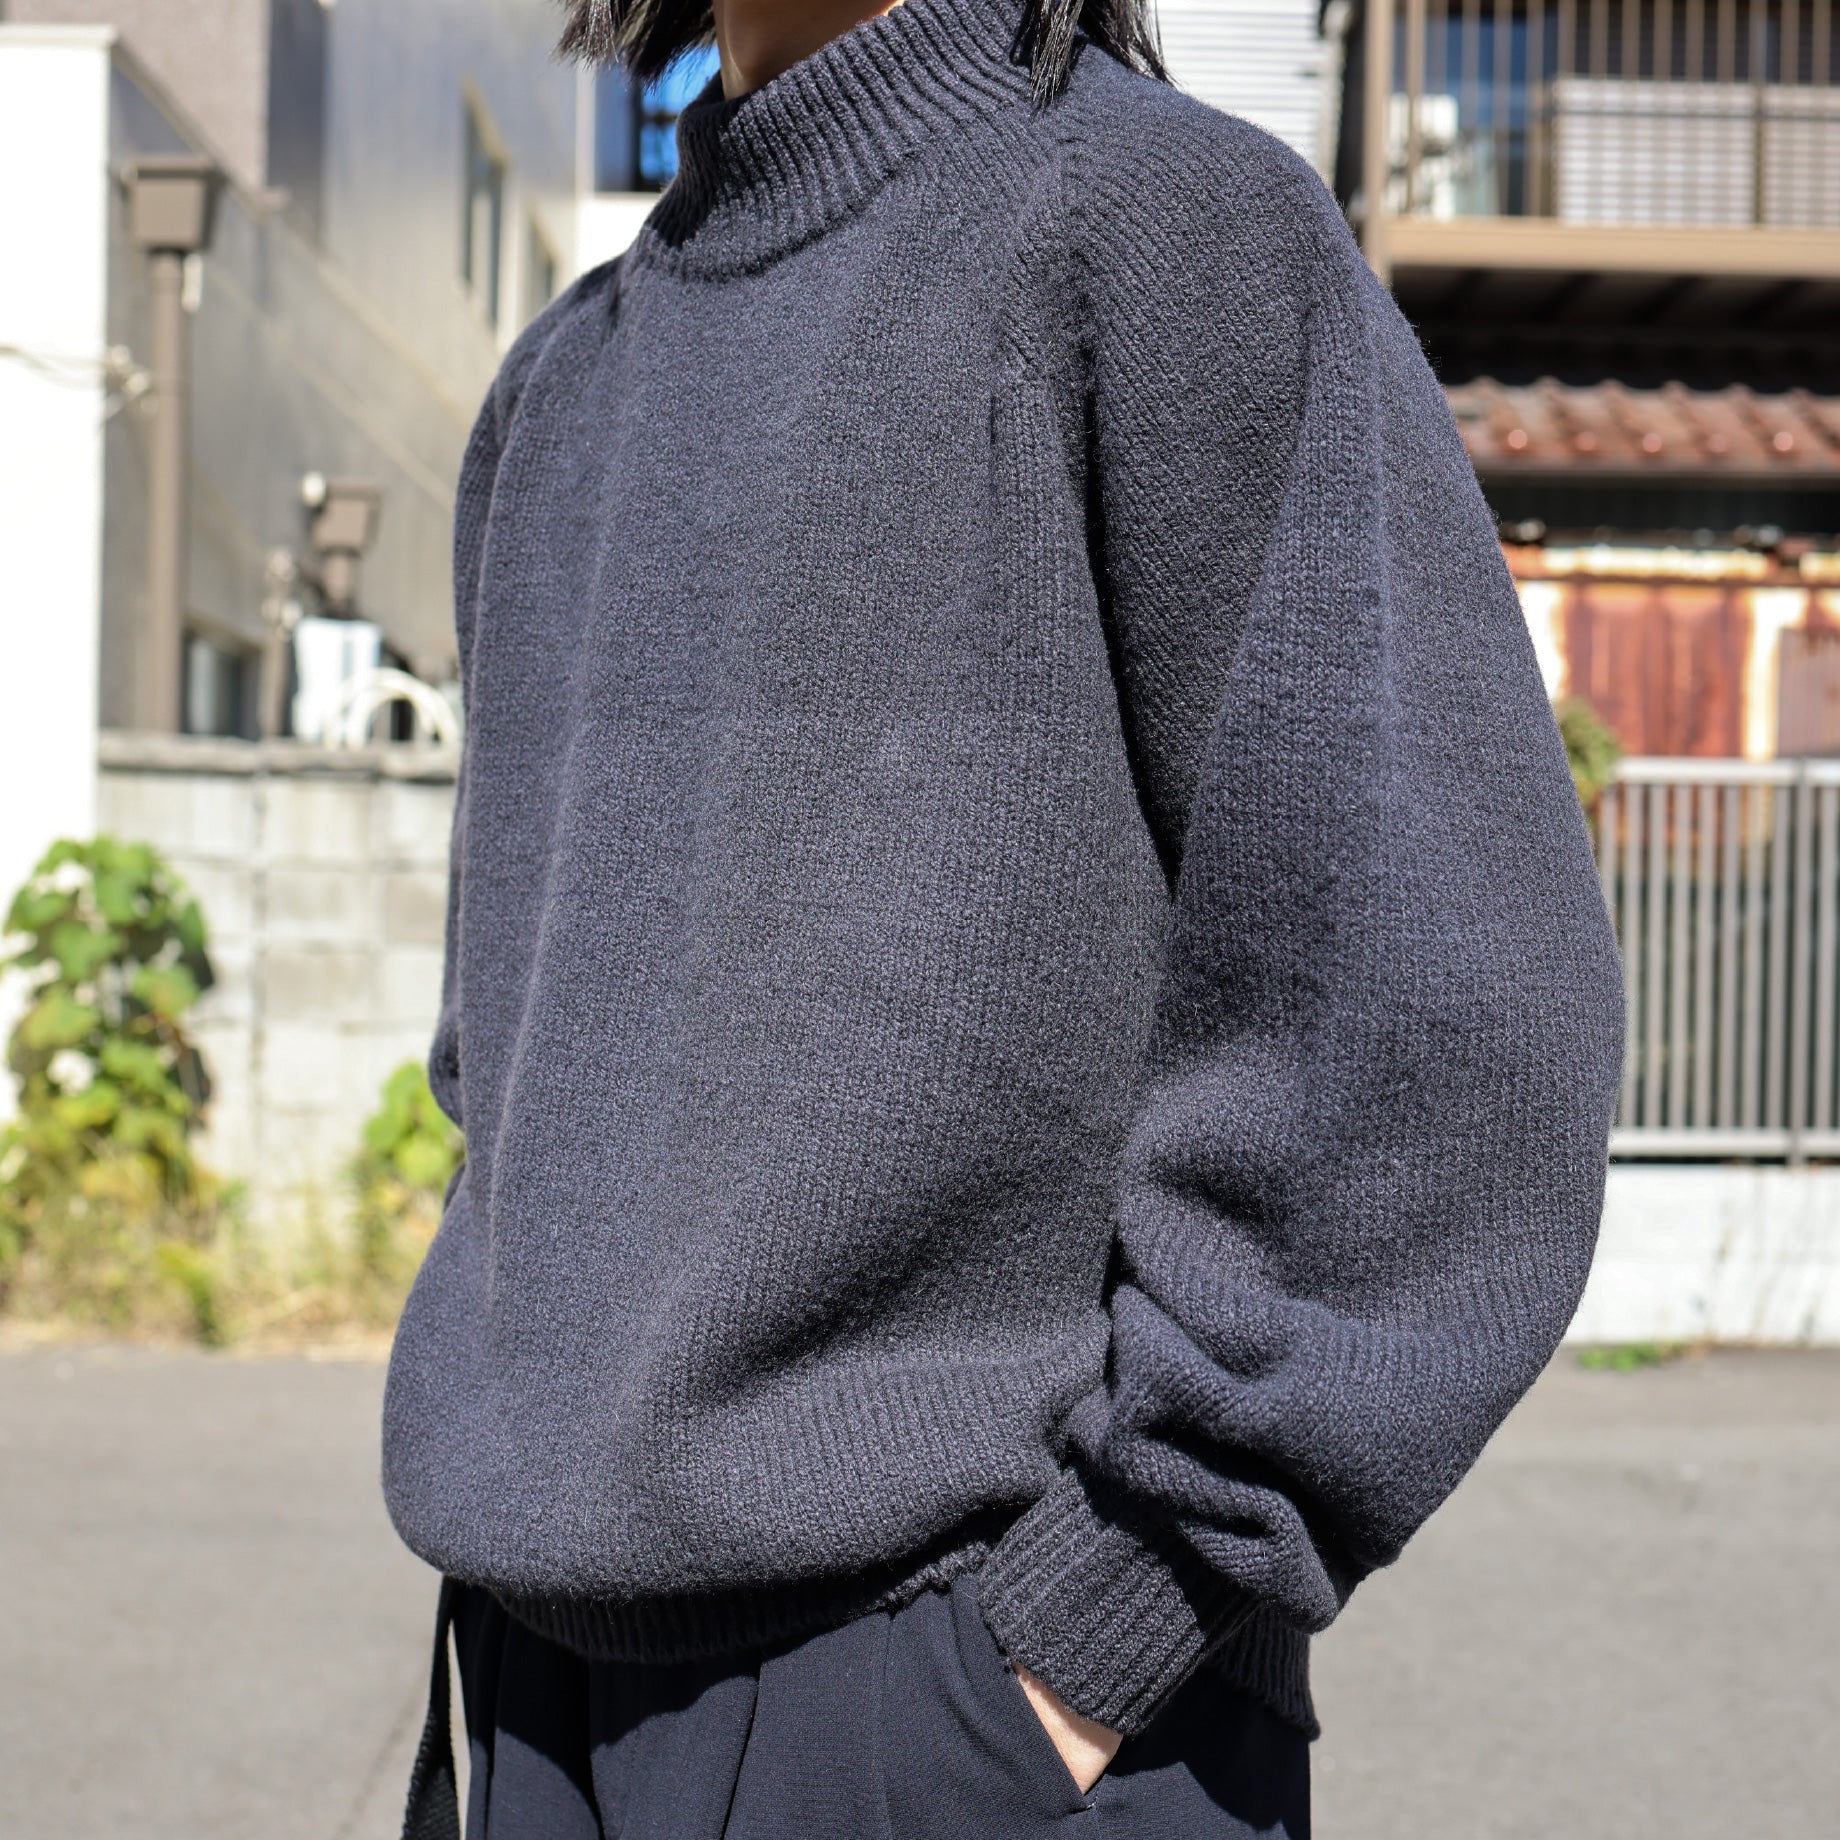 W/G MOC NECK L/S (CHACOAL)